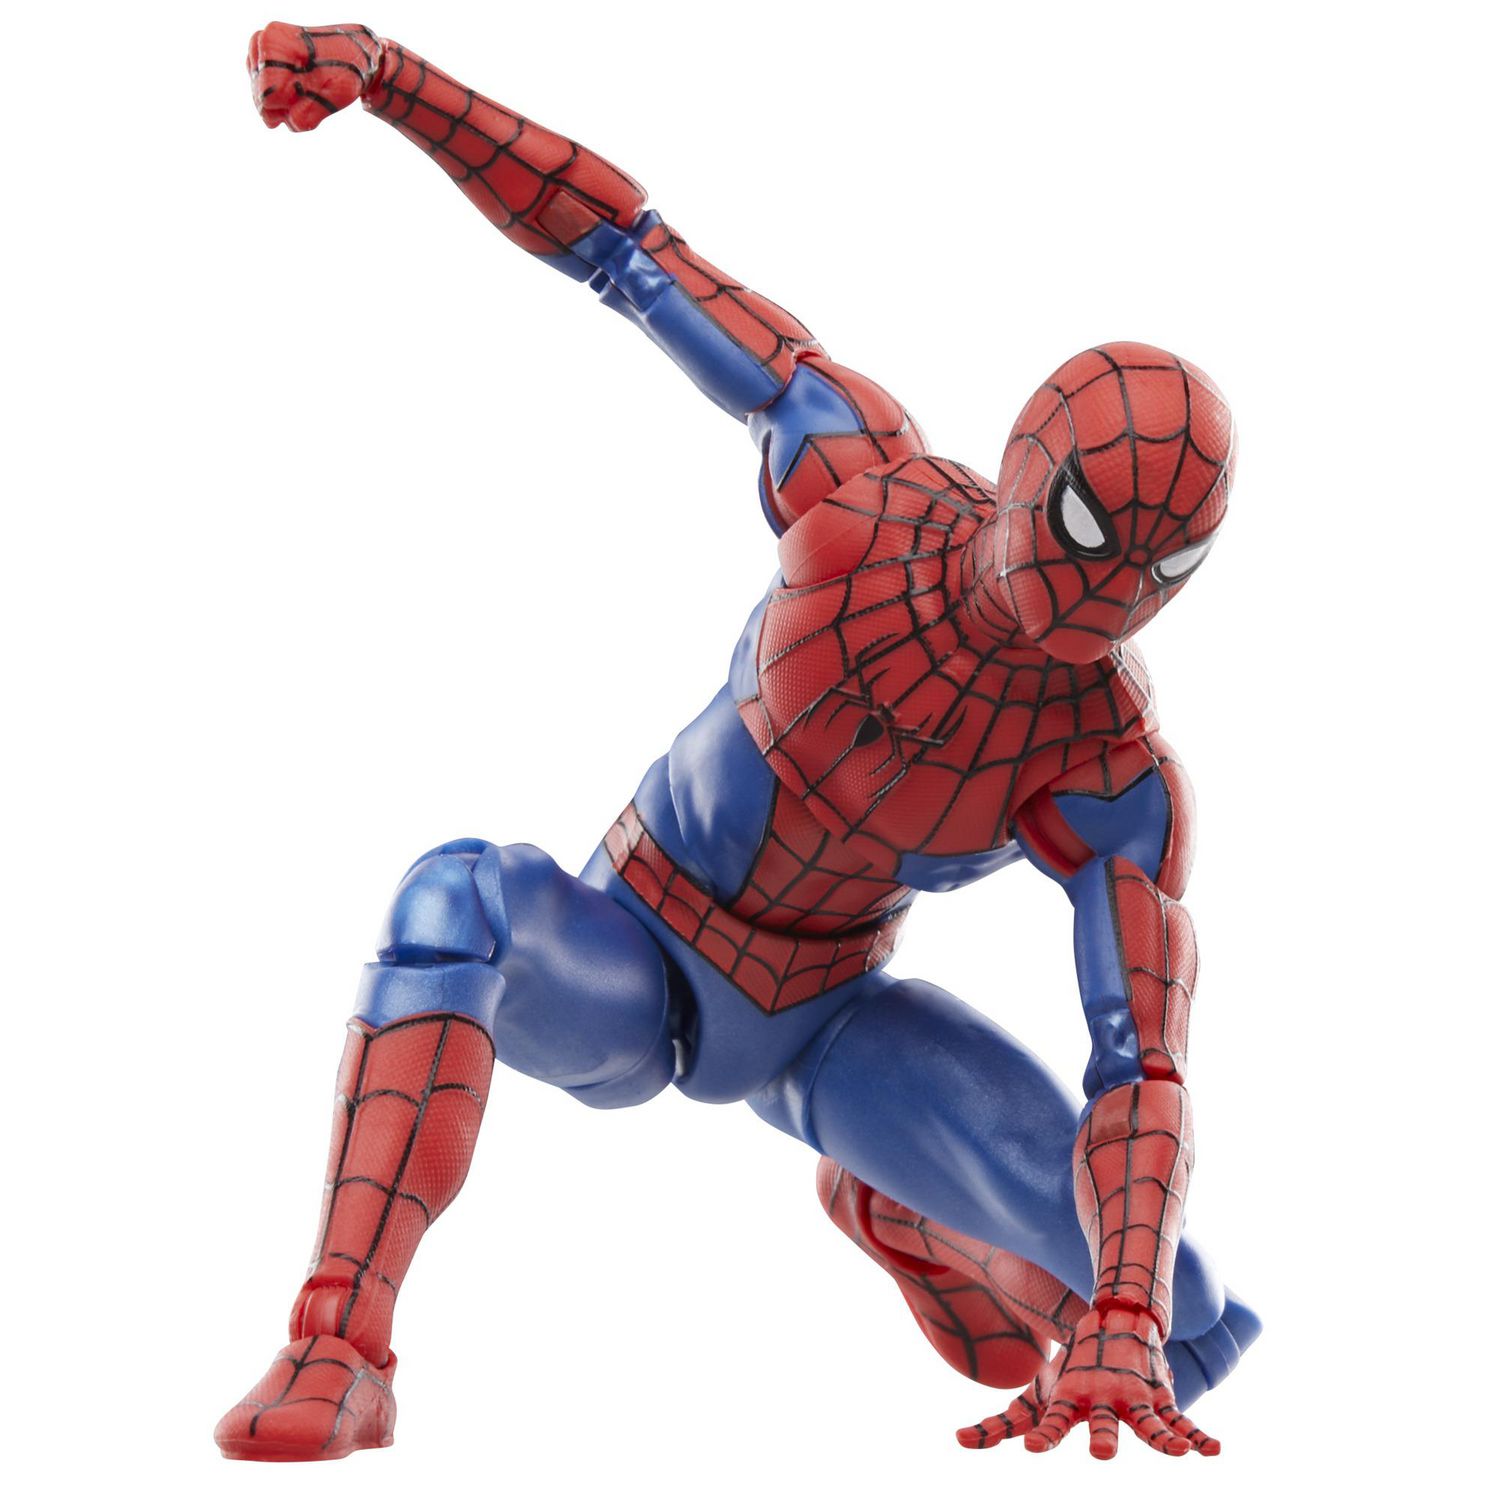 Spider-Man Action Figure as an Artists Reference - Who Knew? - HubPages